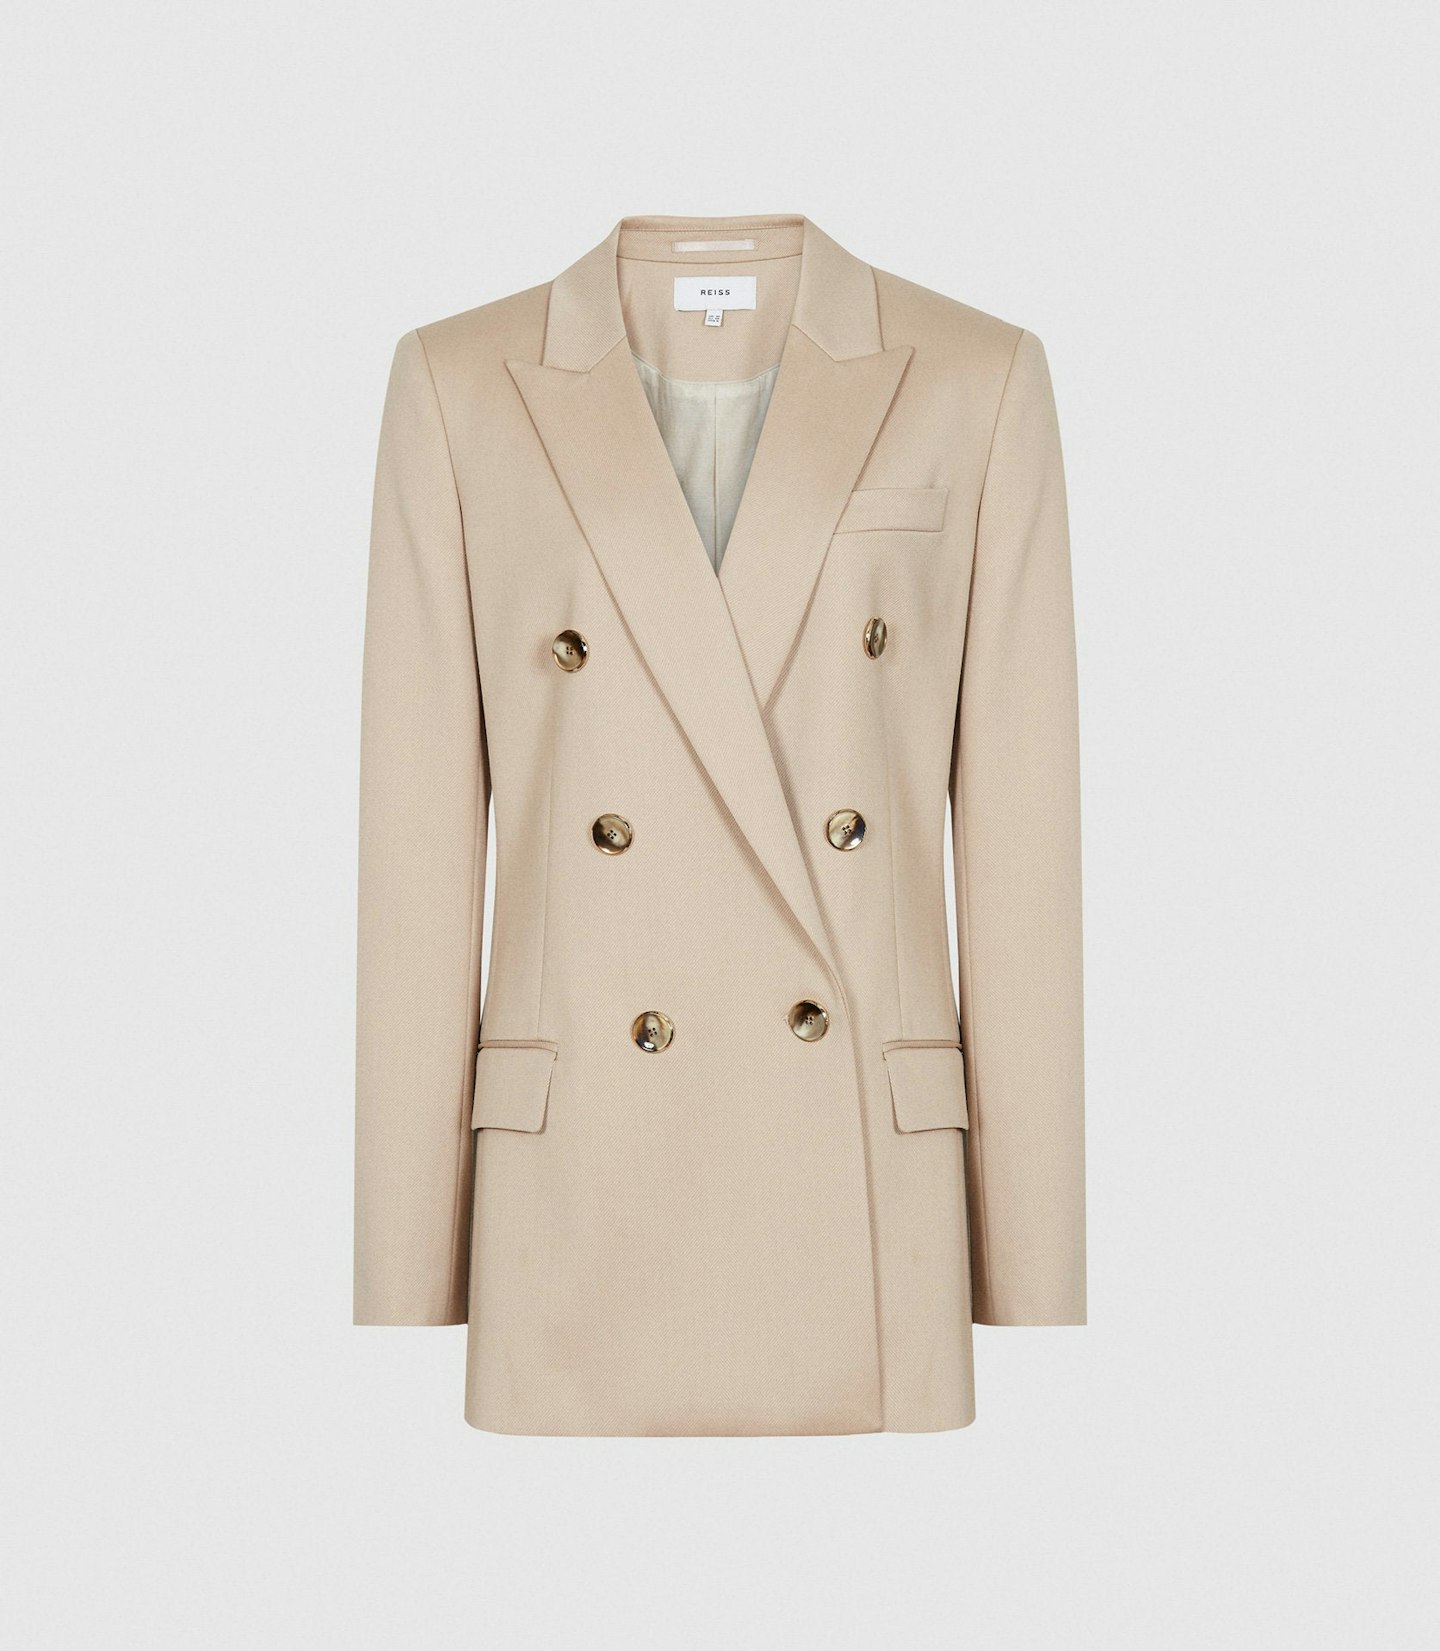 Reiss, Larsson Double-Breasted Twill Blazer, £285